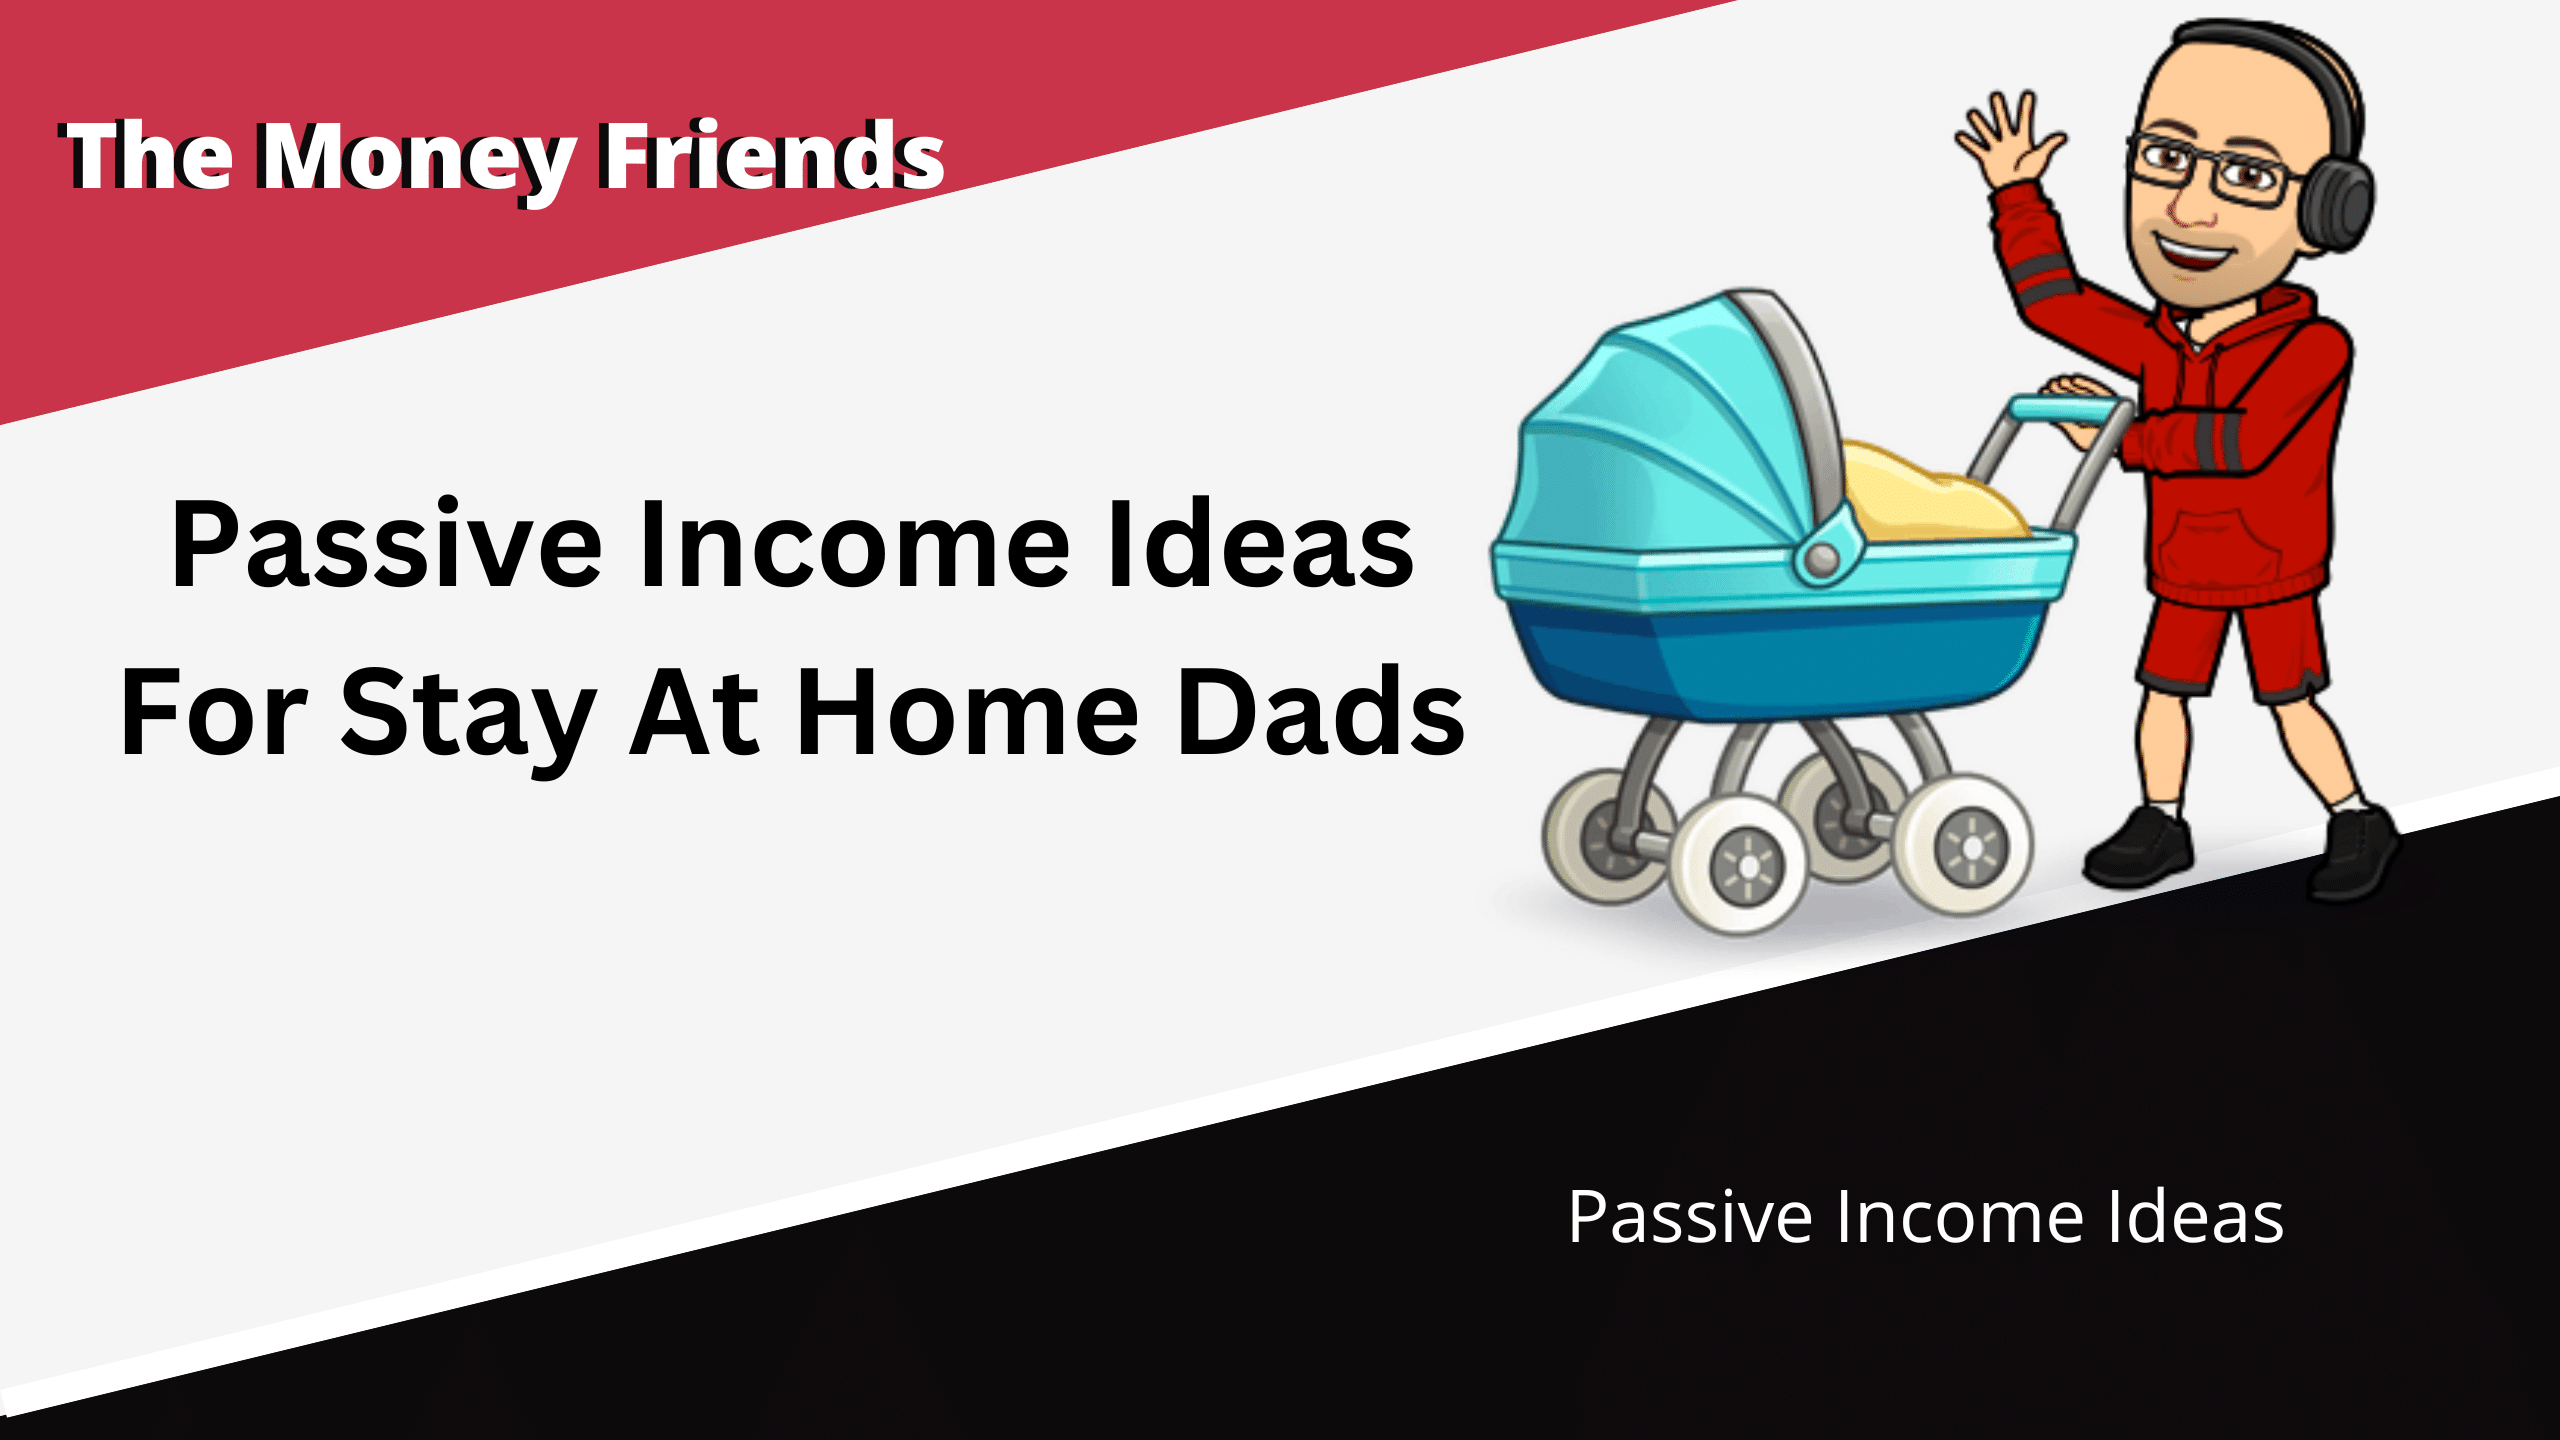 Passive Income Ideas For Stay At Home Dads